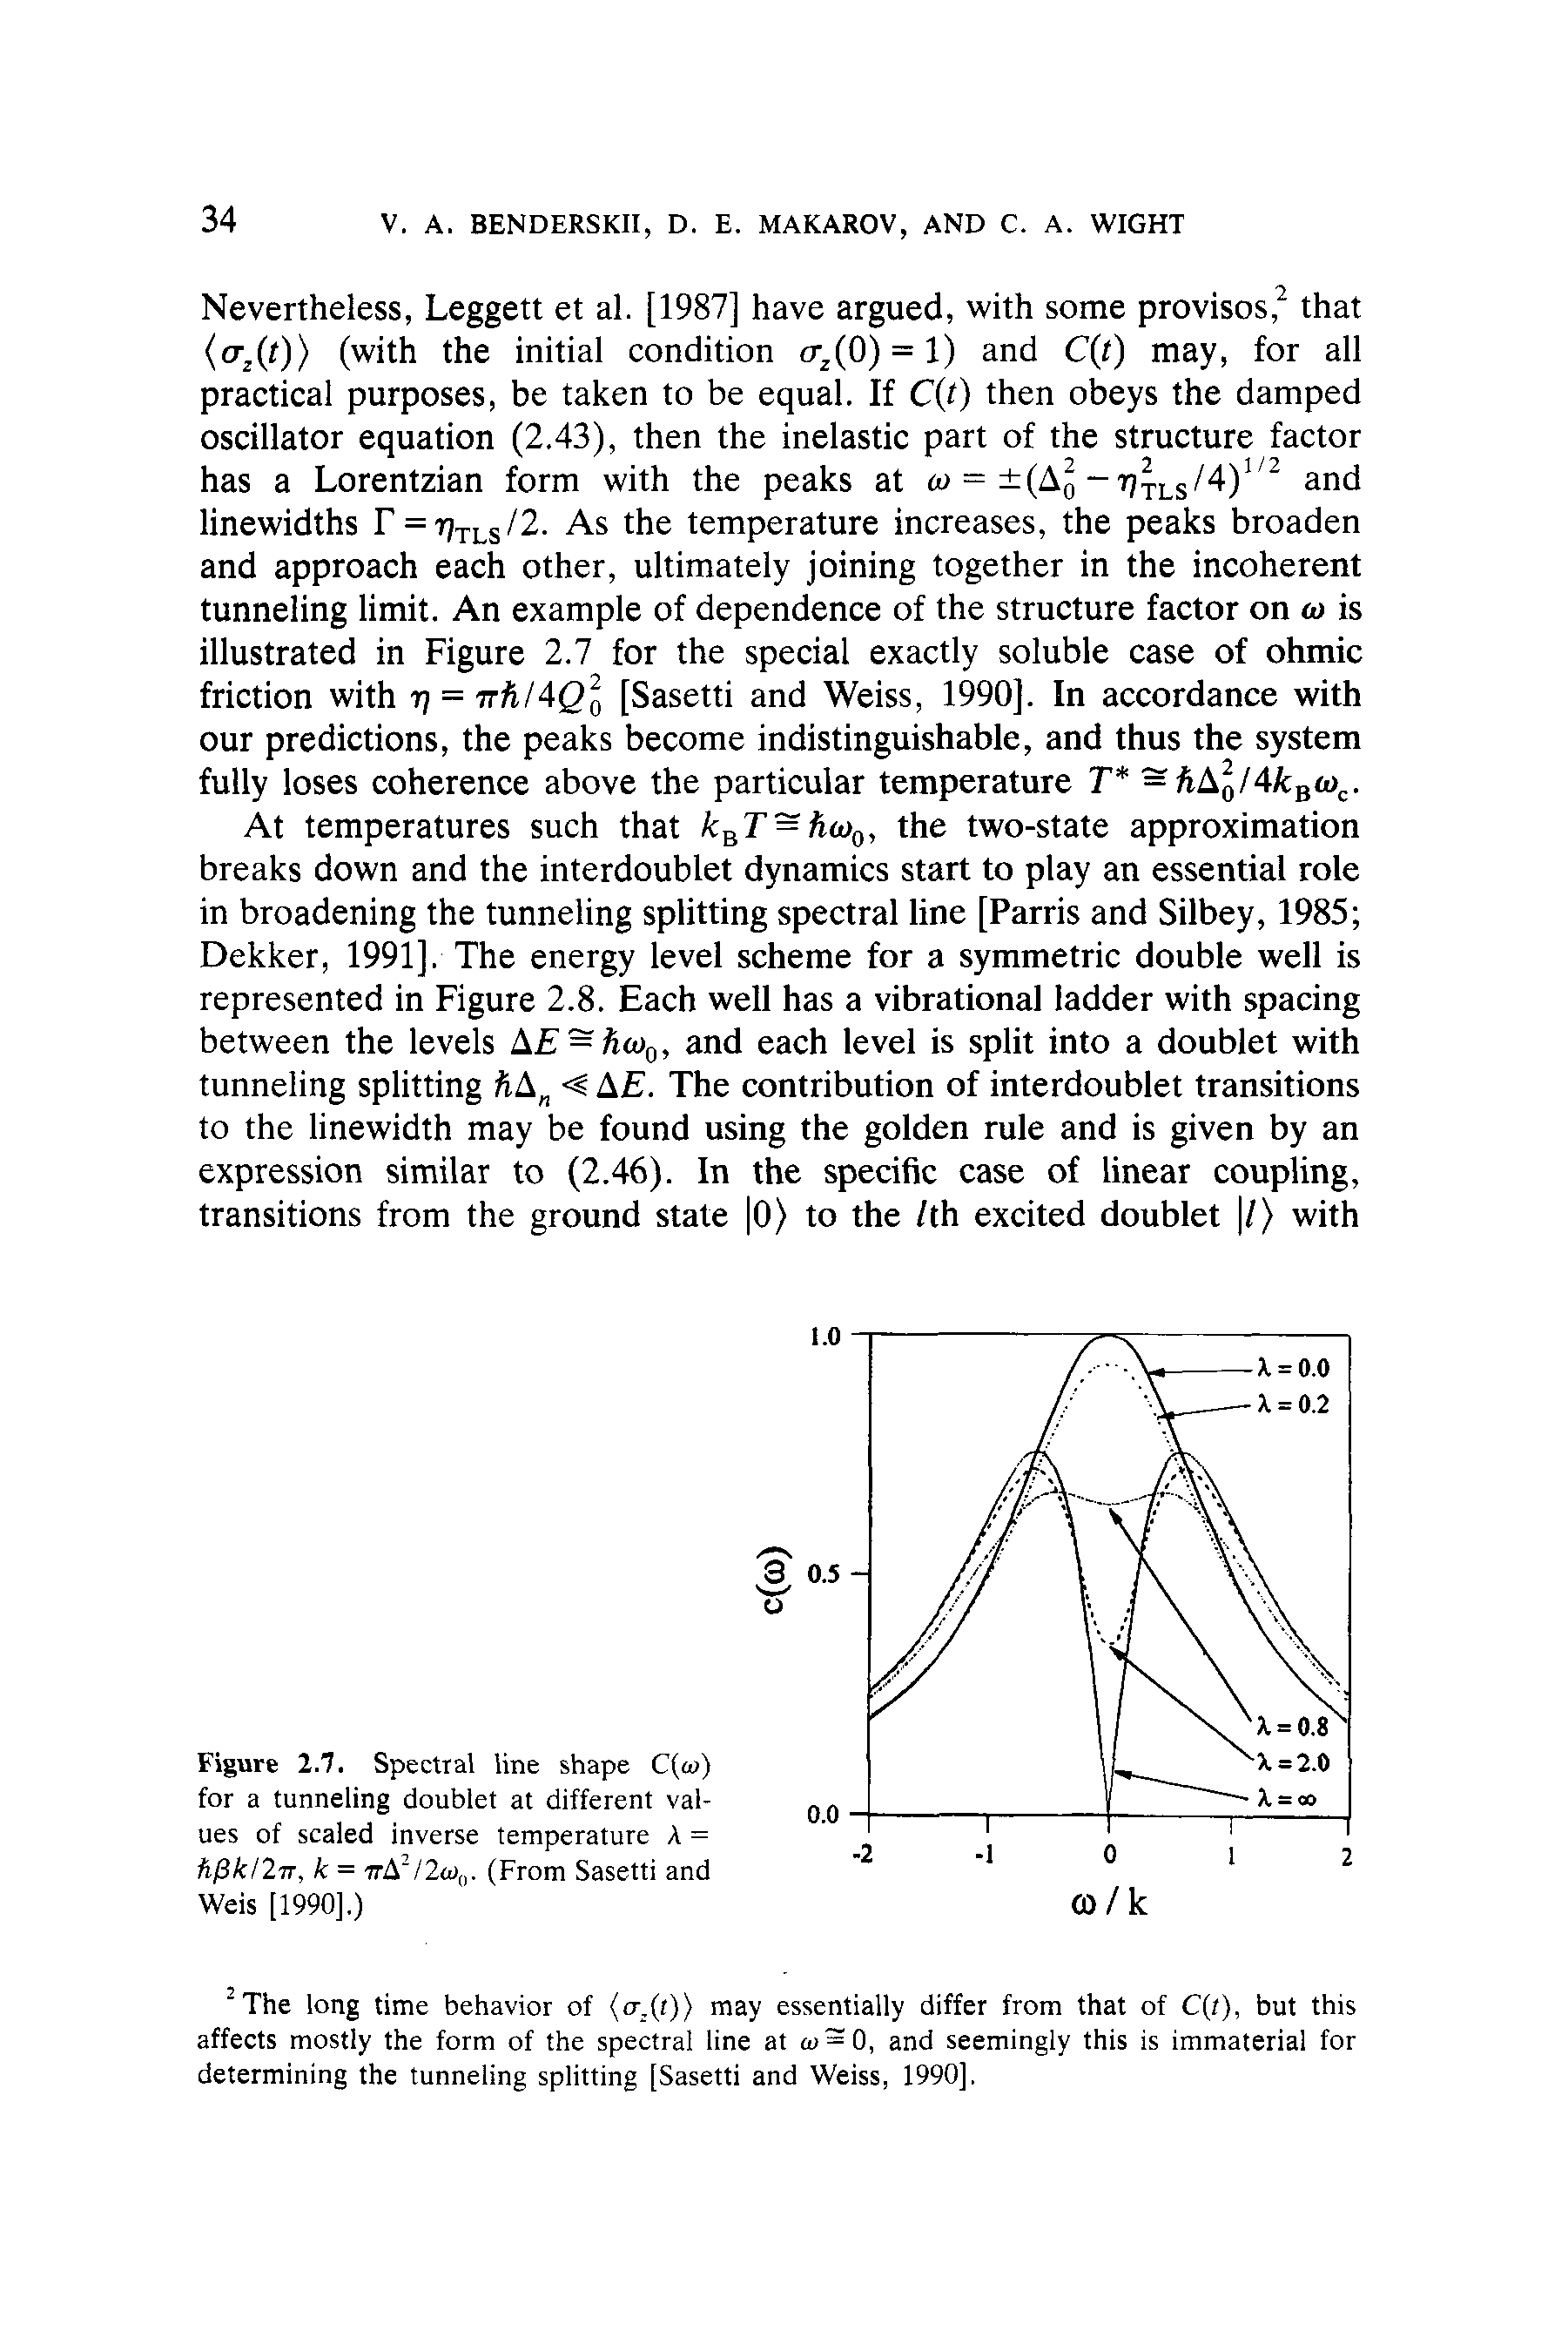 Figure 2.7. Spectral line shape C( ) for a tunneling doublet at different values of scaled inverse temperature A = hf3k/2ir, k = irA2/2ta0. (From Sasetti and Weis [1990].)...